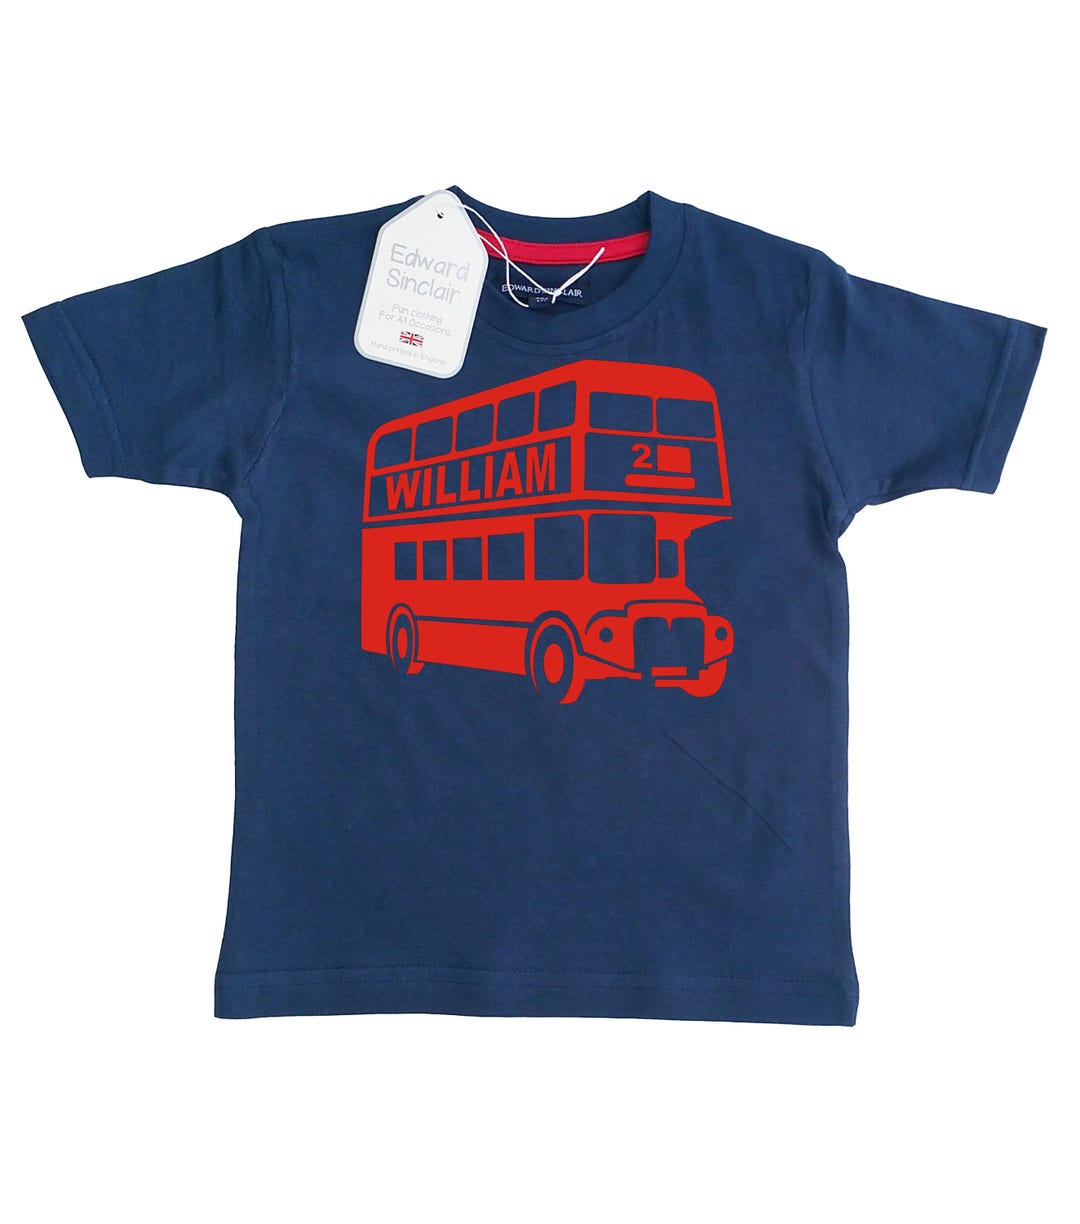 Personalised London Bus With Name and Number Children's Navy T Shirt - Etsy